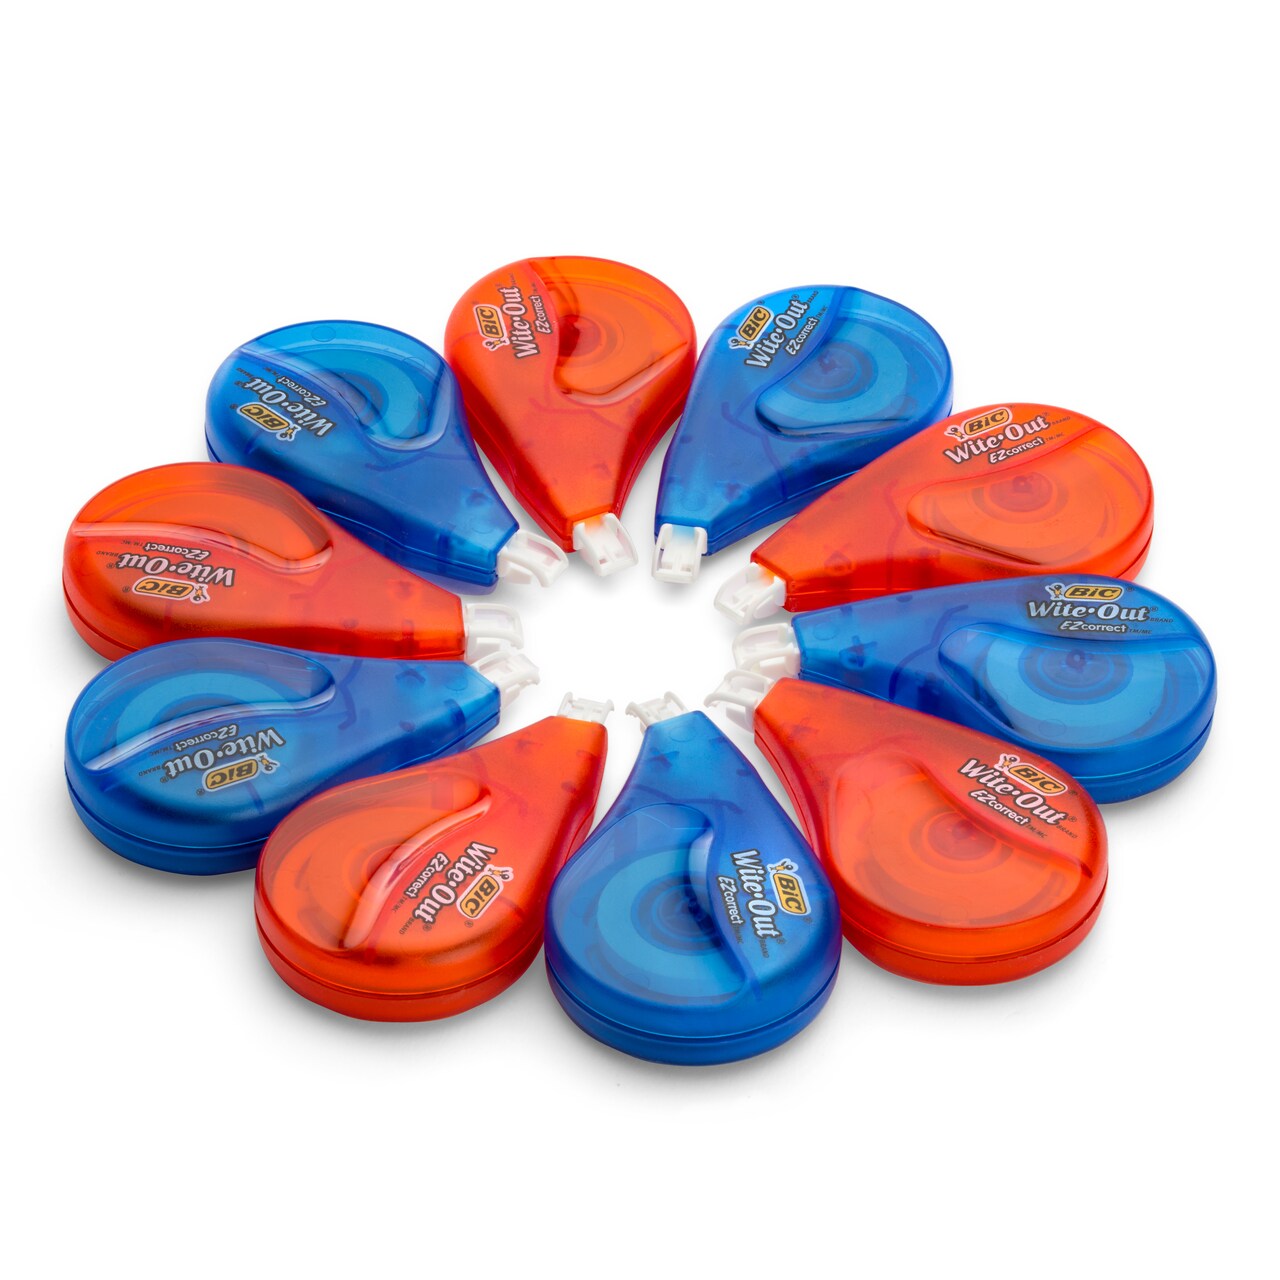 BIC Wite-Out Brand EZ Correct Correction Tape, 10-Count